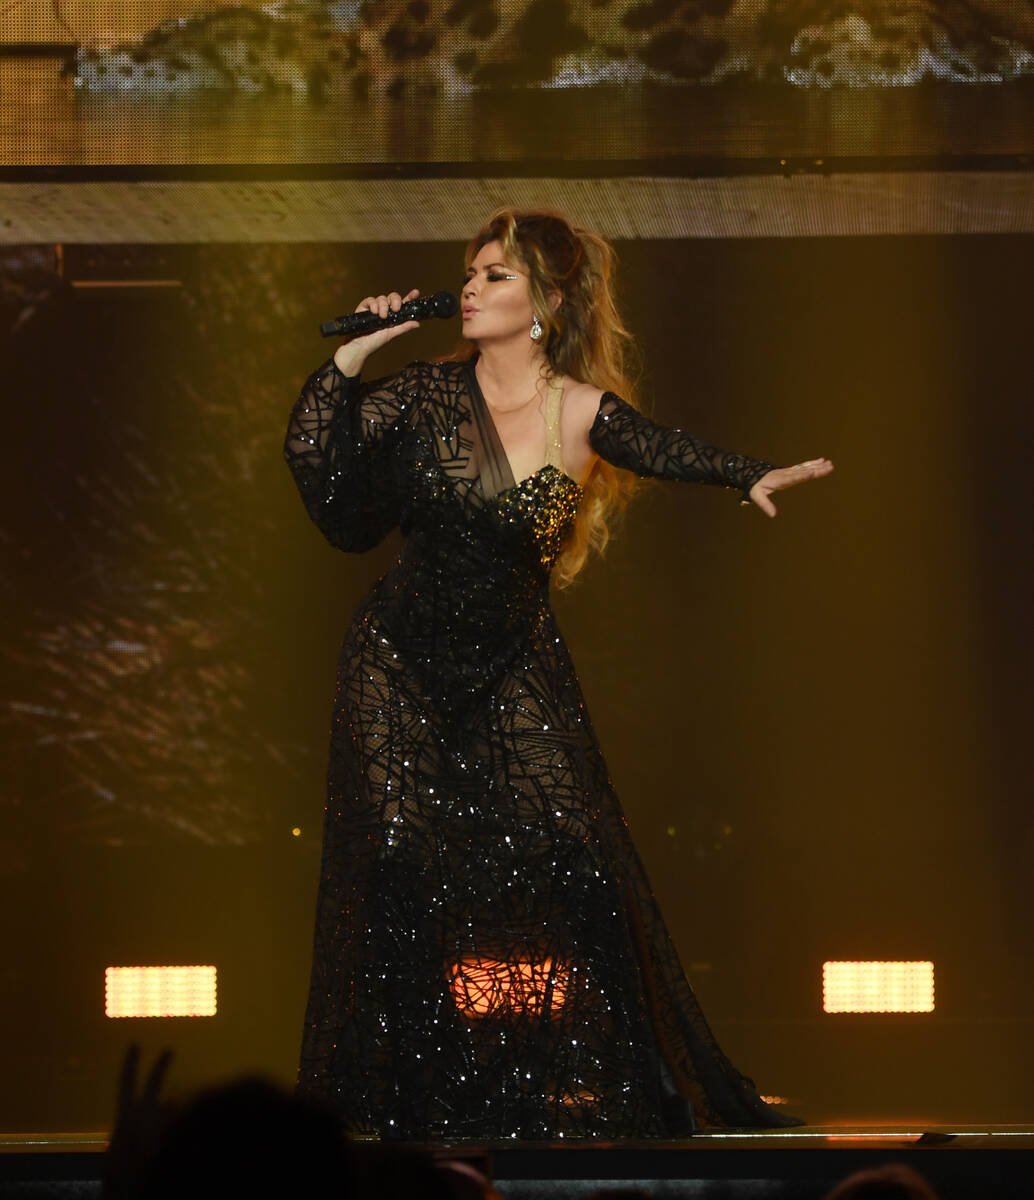 Shania Twain performs at Zappos Theater